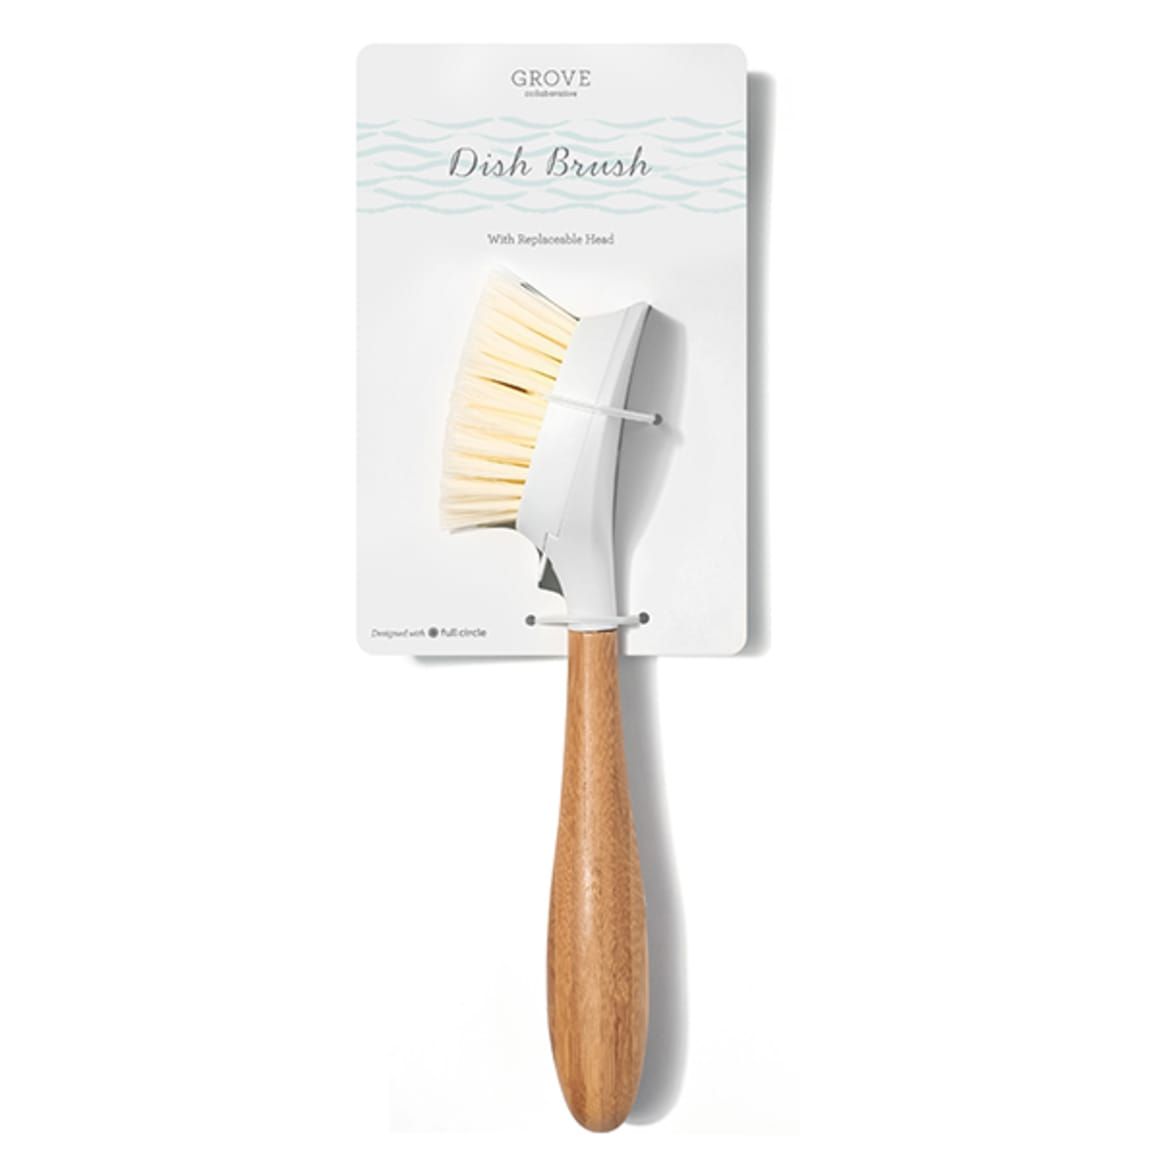 Grove Co. Replaceable Head Dish Brush | Grove